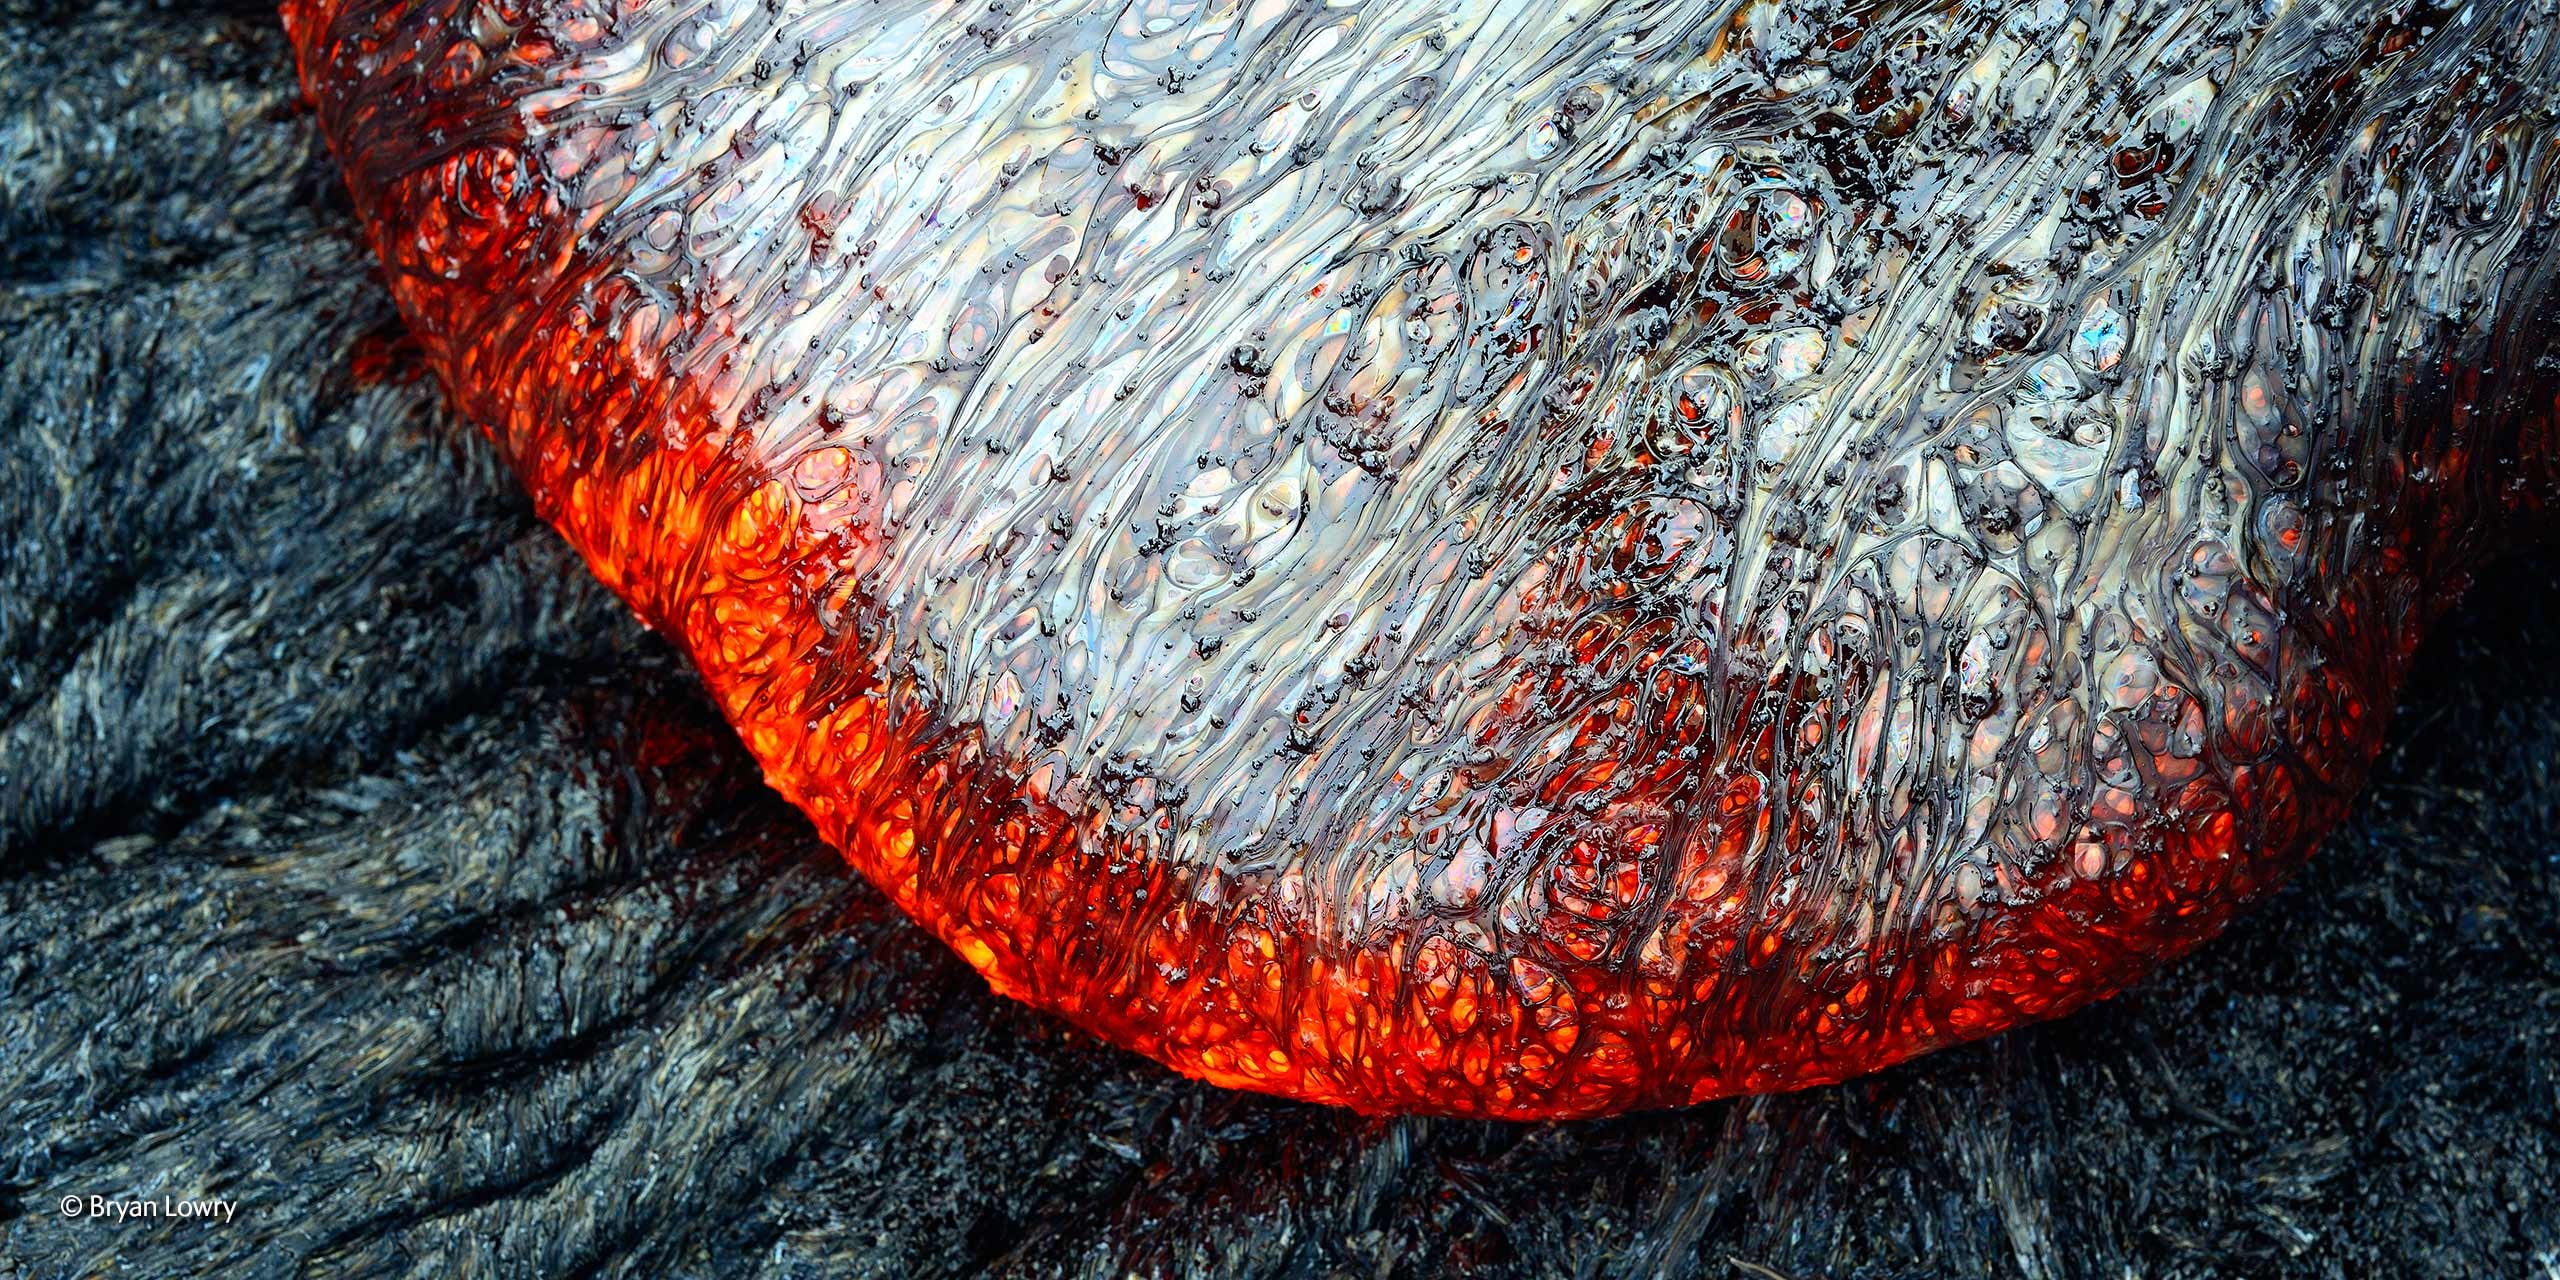 lava, volcano, red, no people, close-up, textured, rock, rock - object